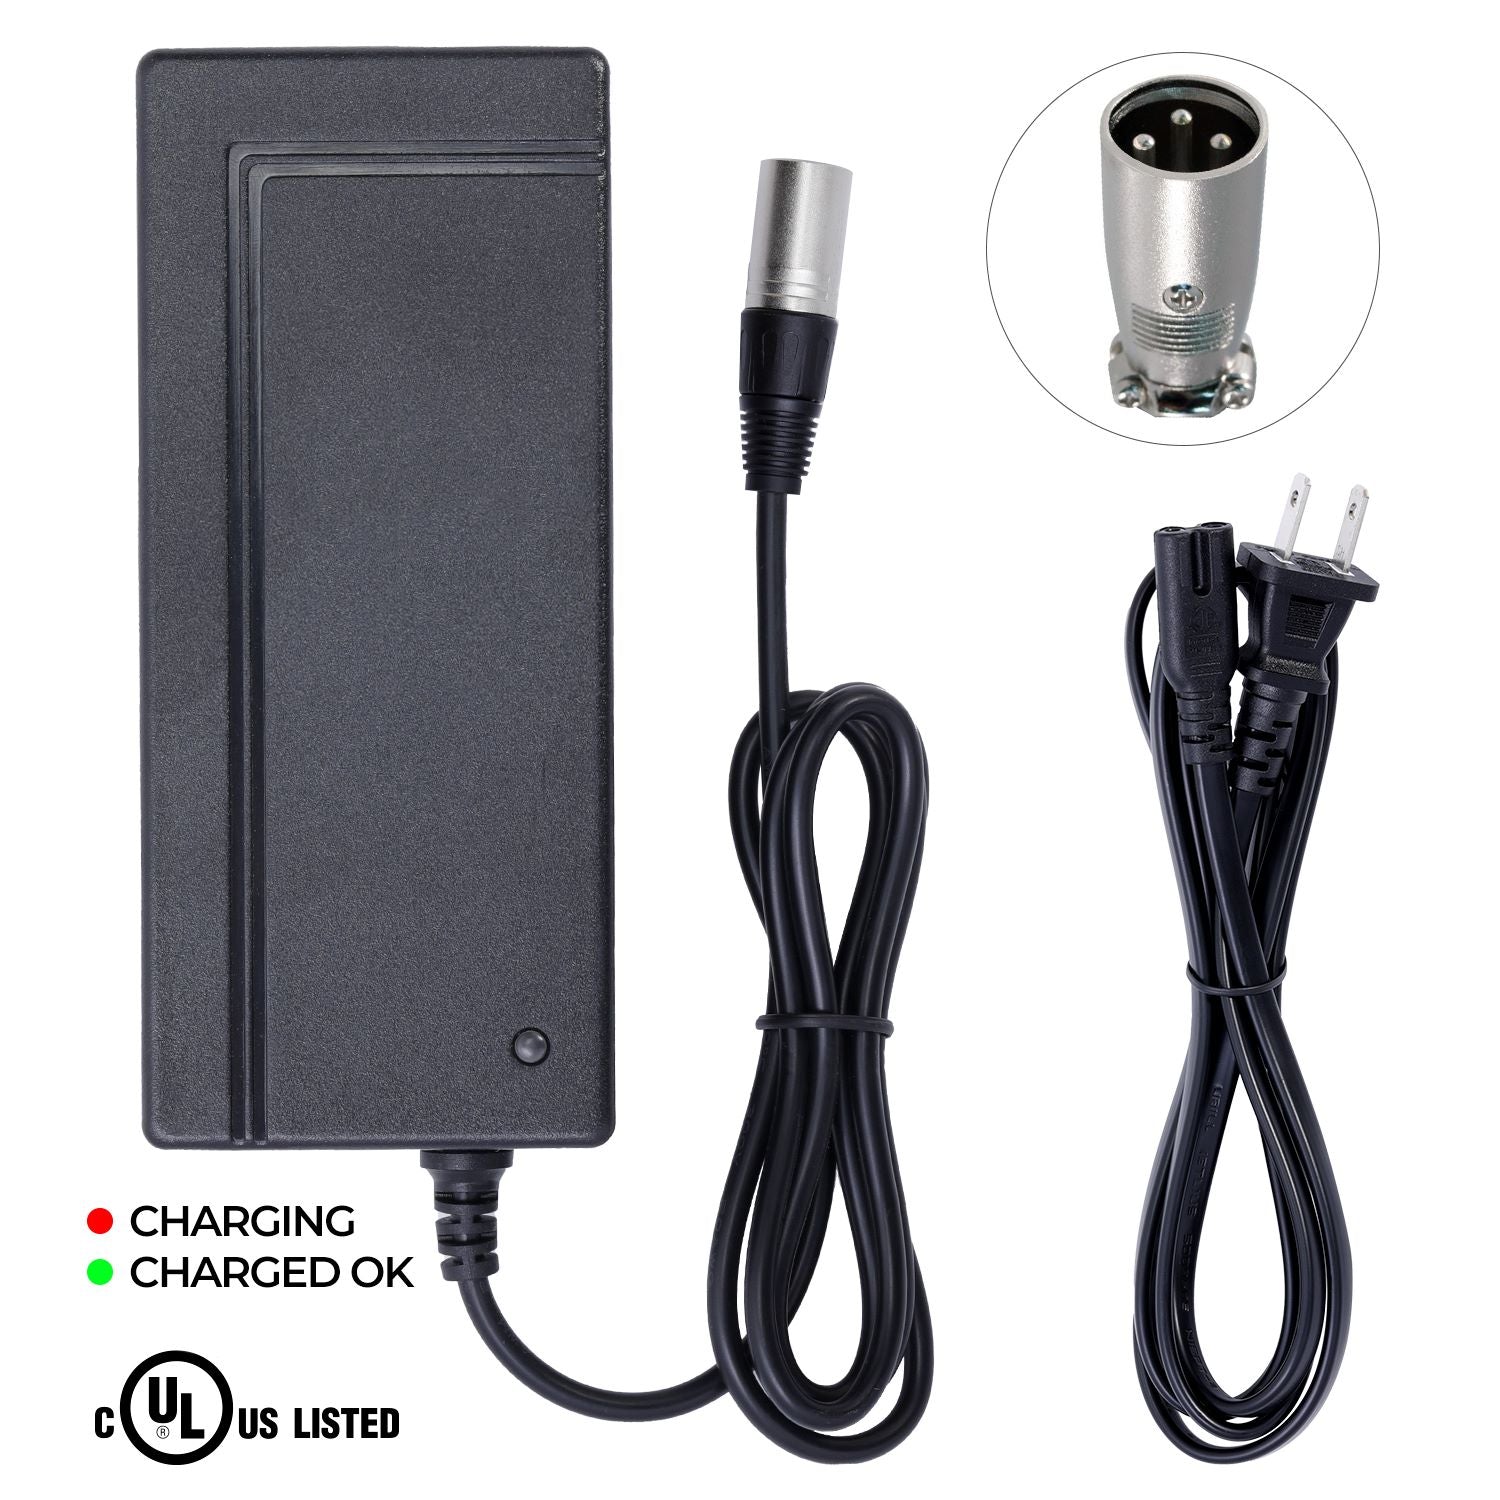 UL Certified Charger for Pride S74 Go Go Sport 4 Wheel Travel Scooter